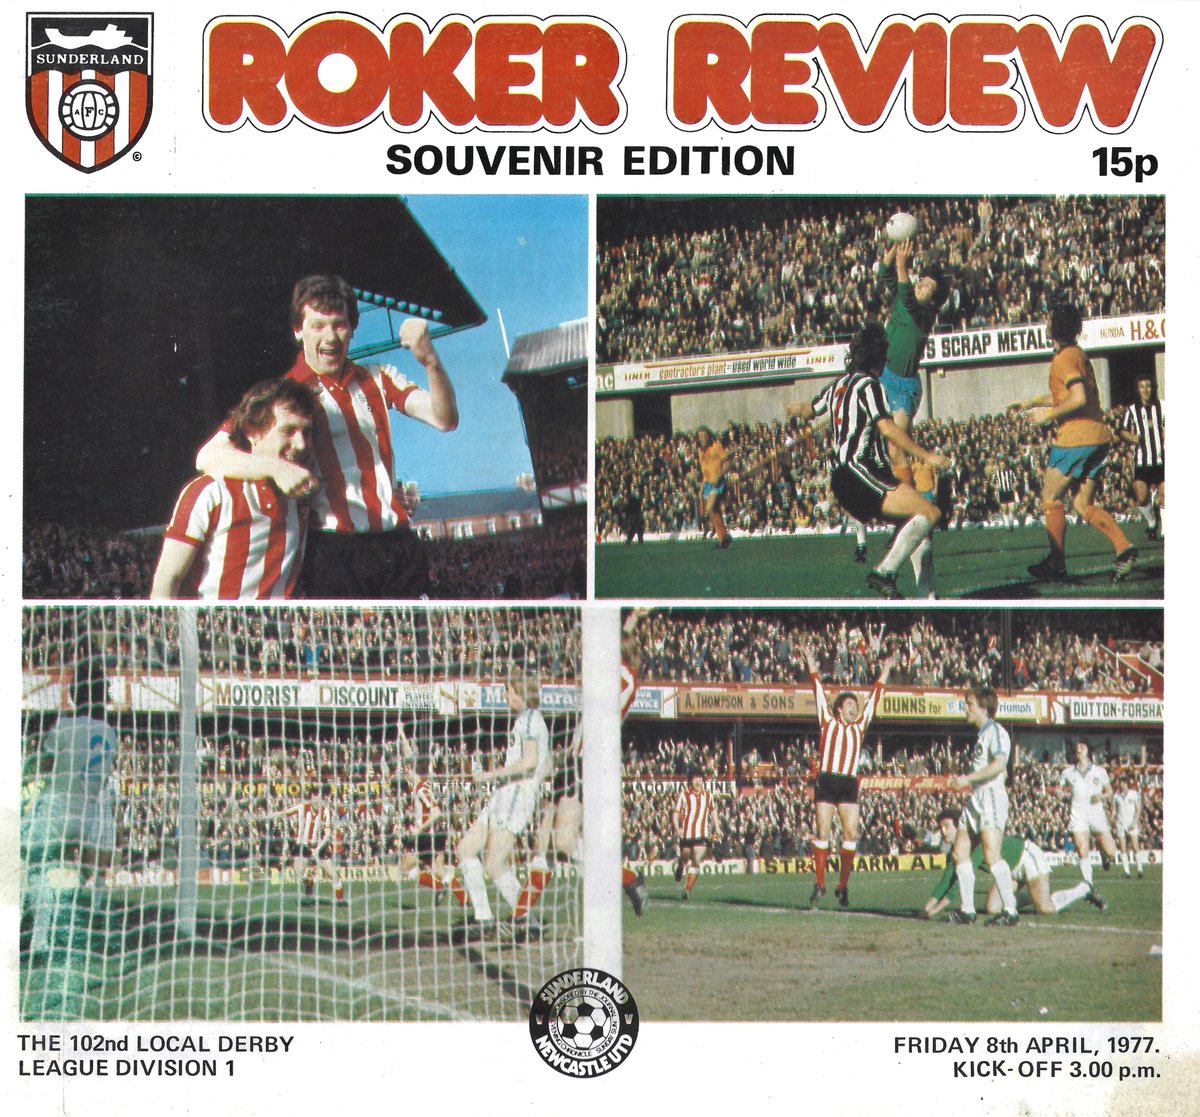 Get a flick through the Sunderland vs Newcastle United football programme from 1977 scanned in full into Flickr Click on the link below to read and enjoy #Sunderland #SAFC #NewcastleUnited #NUFC flickr.com/photos/1140587…